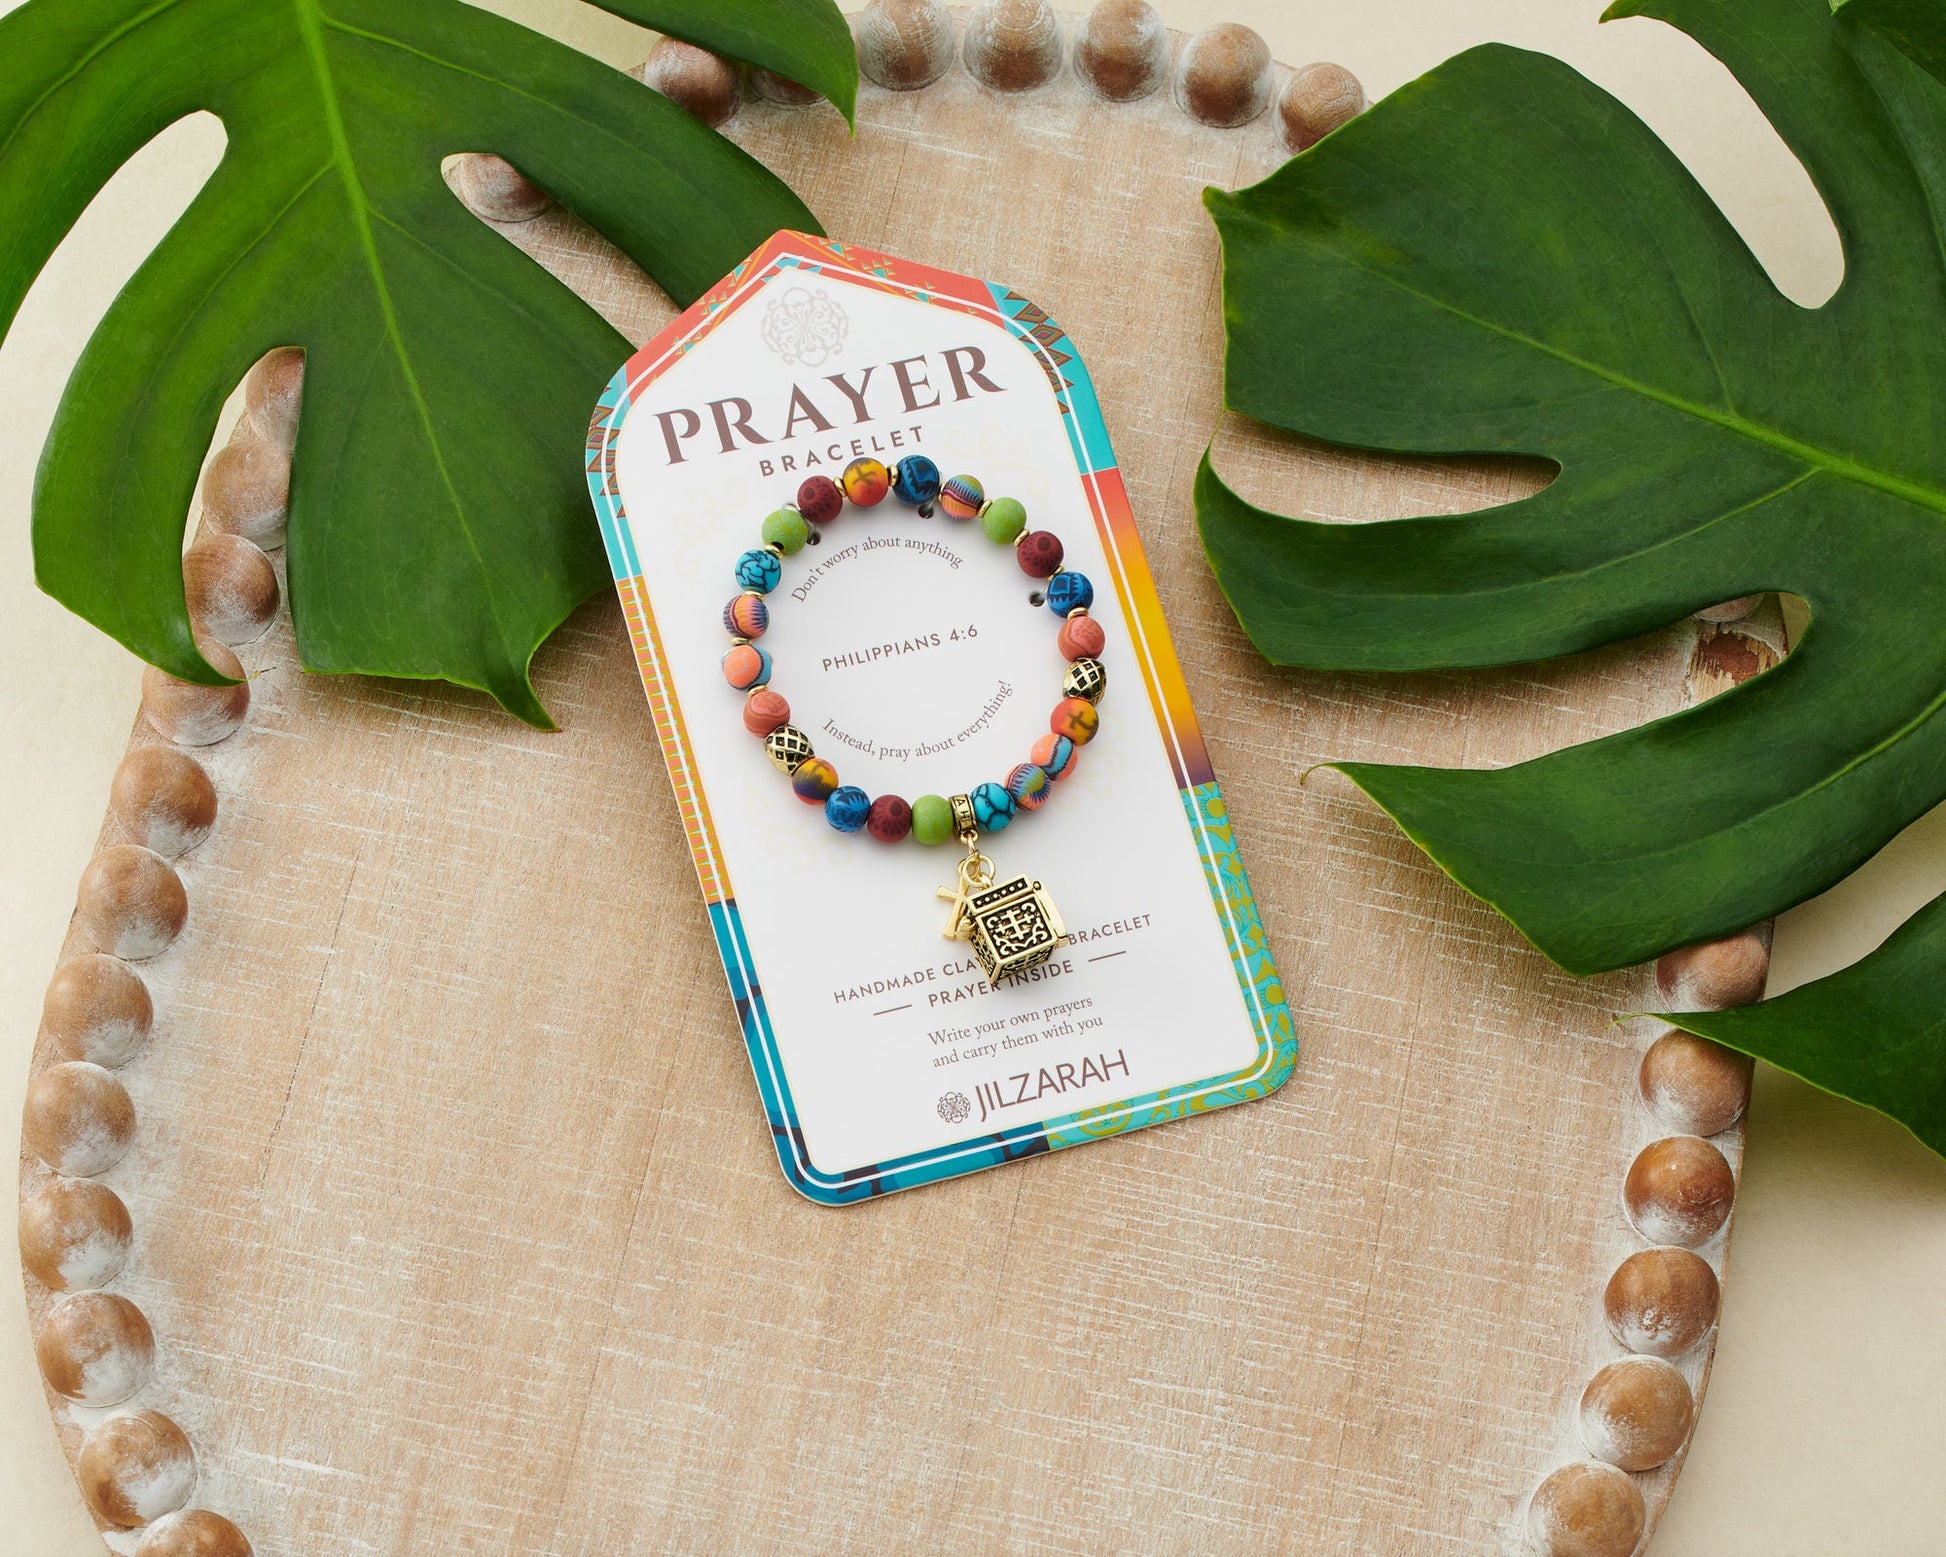 multi colored beaded bracelet with gold cross and prayer box charms on card packaging.